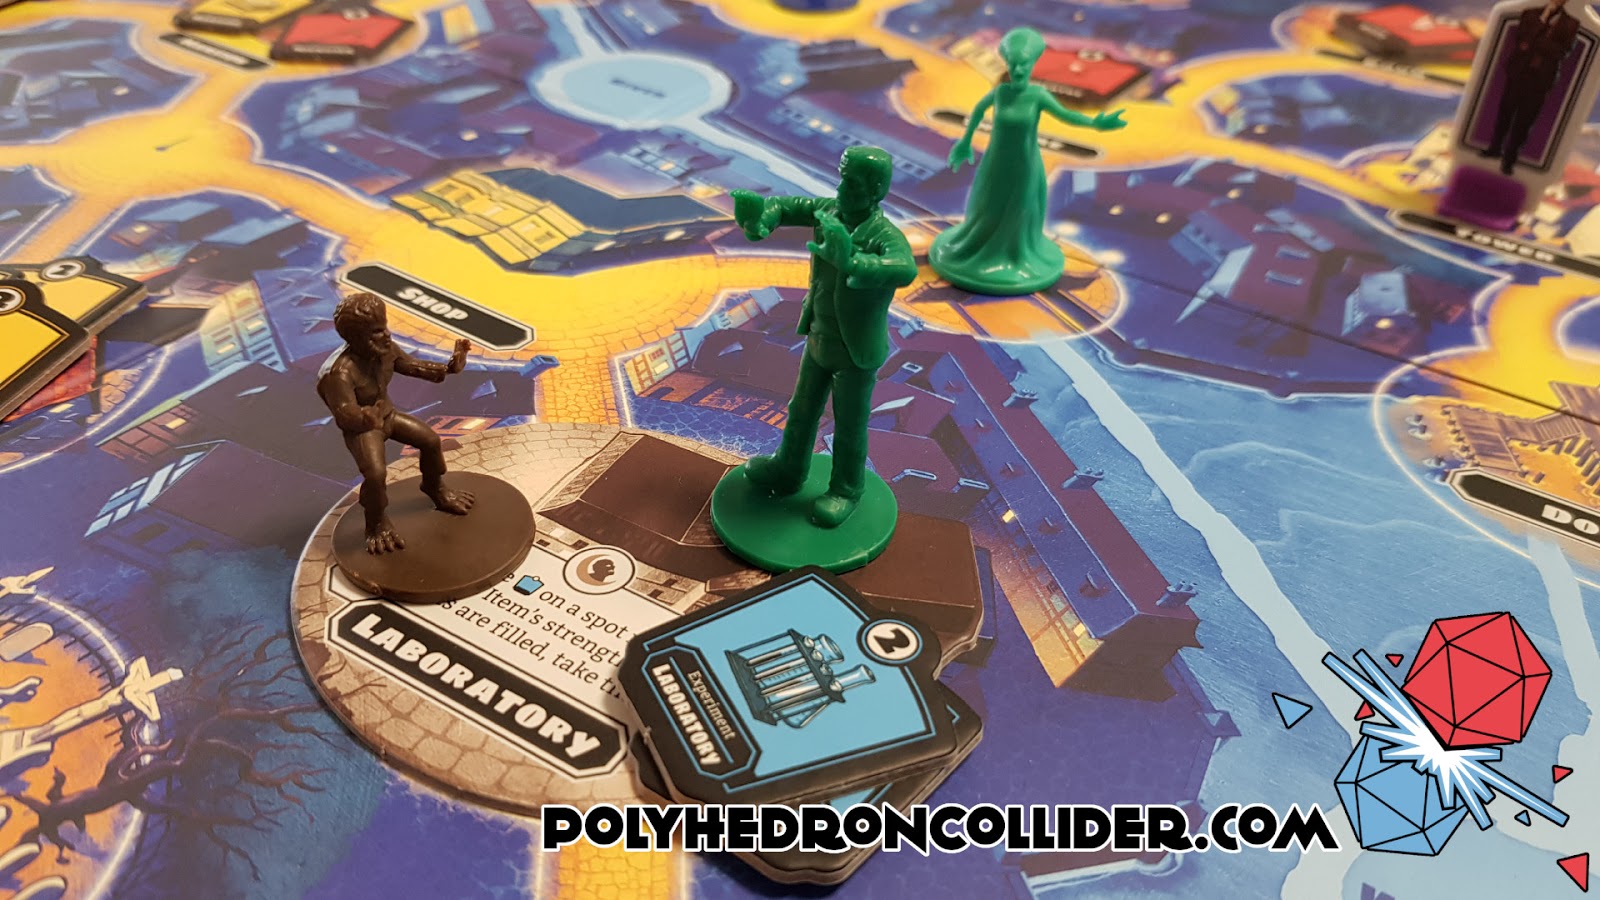 Polyhedron Collider Horrified Board Game Review - Rampaging Monsters